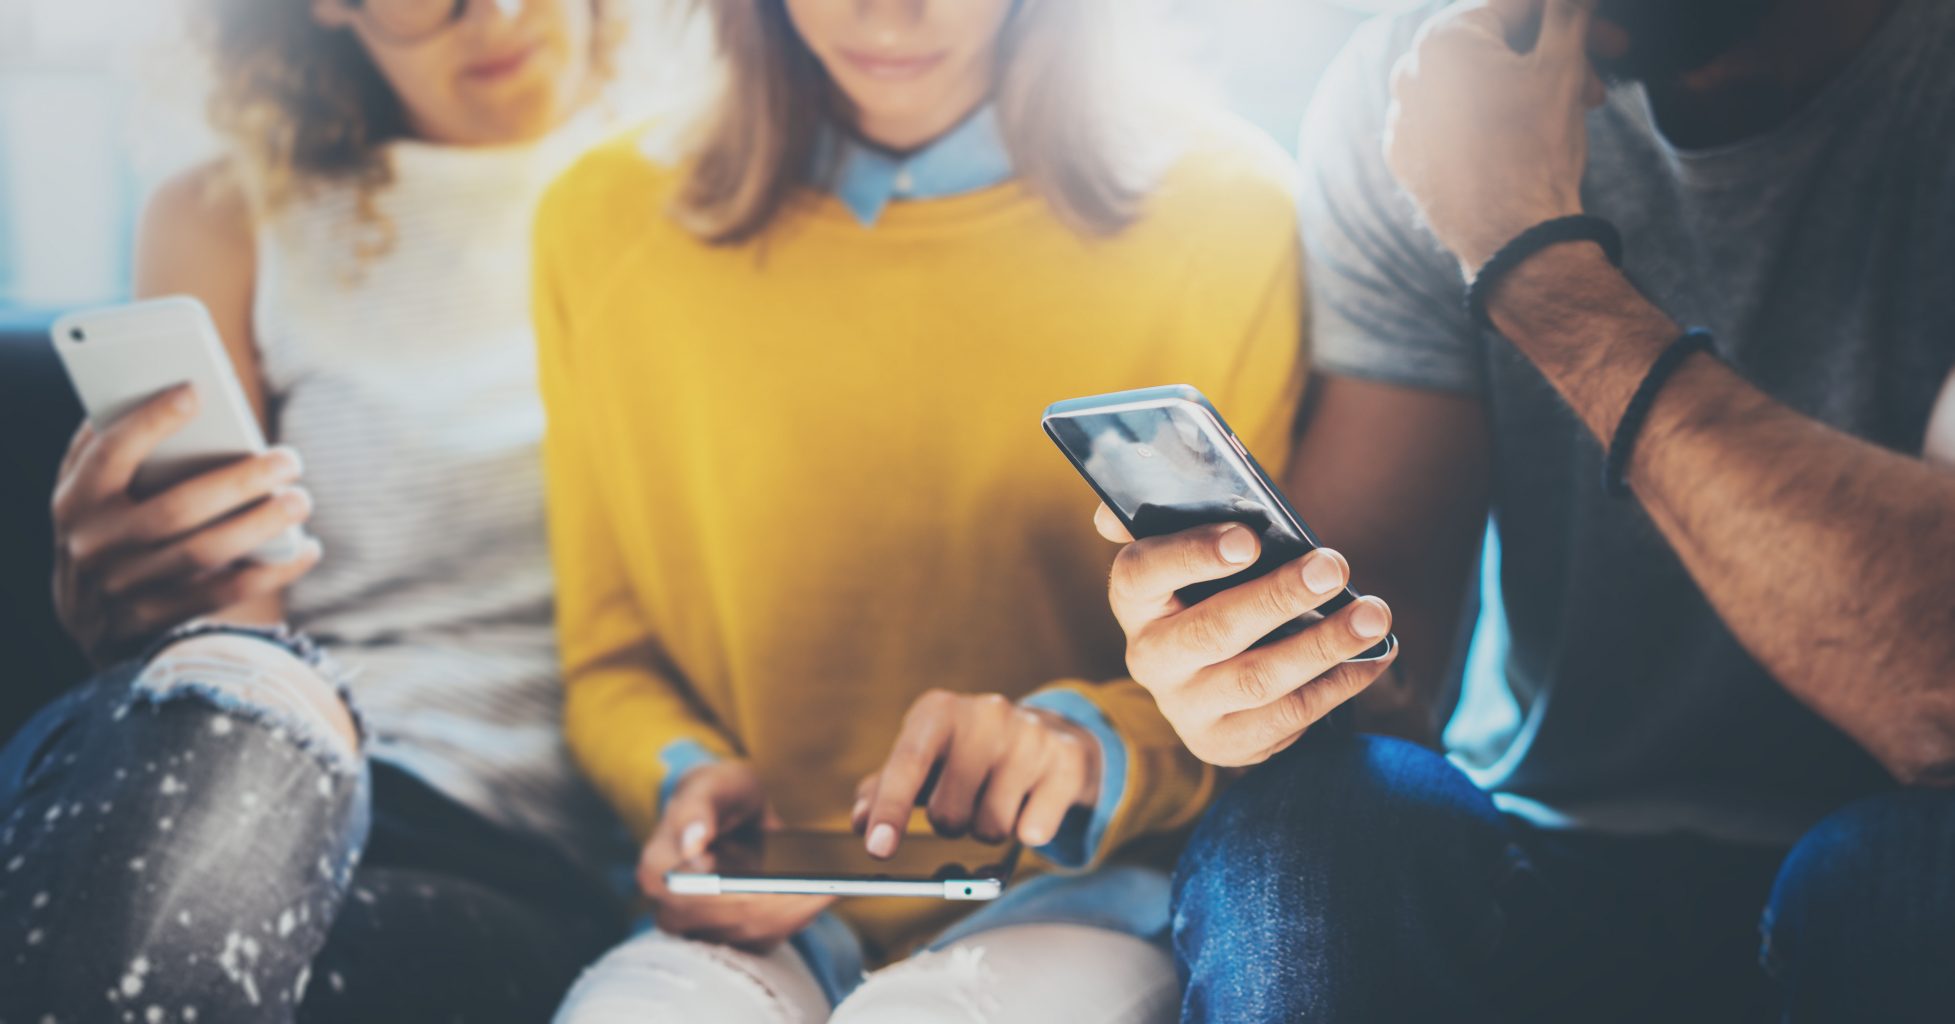 See how rising interest rates, changing media environment, and a wave of millennials entering the financial-product marketplace, shaped financial services digital marketing in 2018.